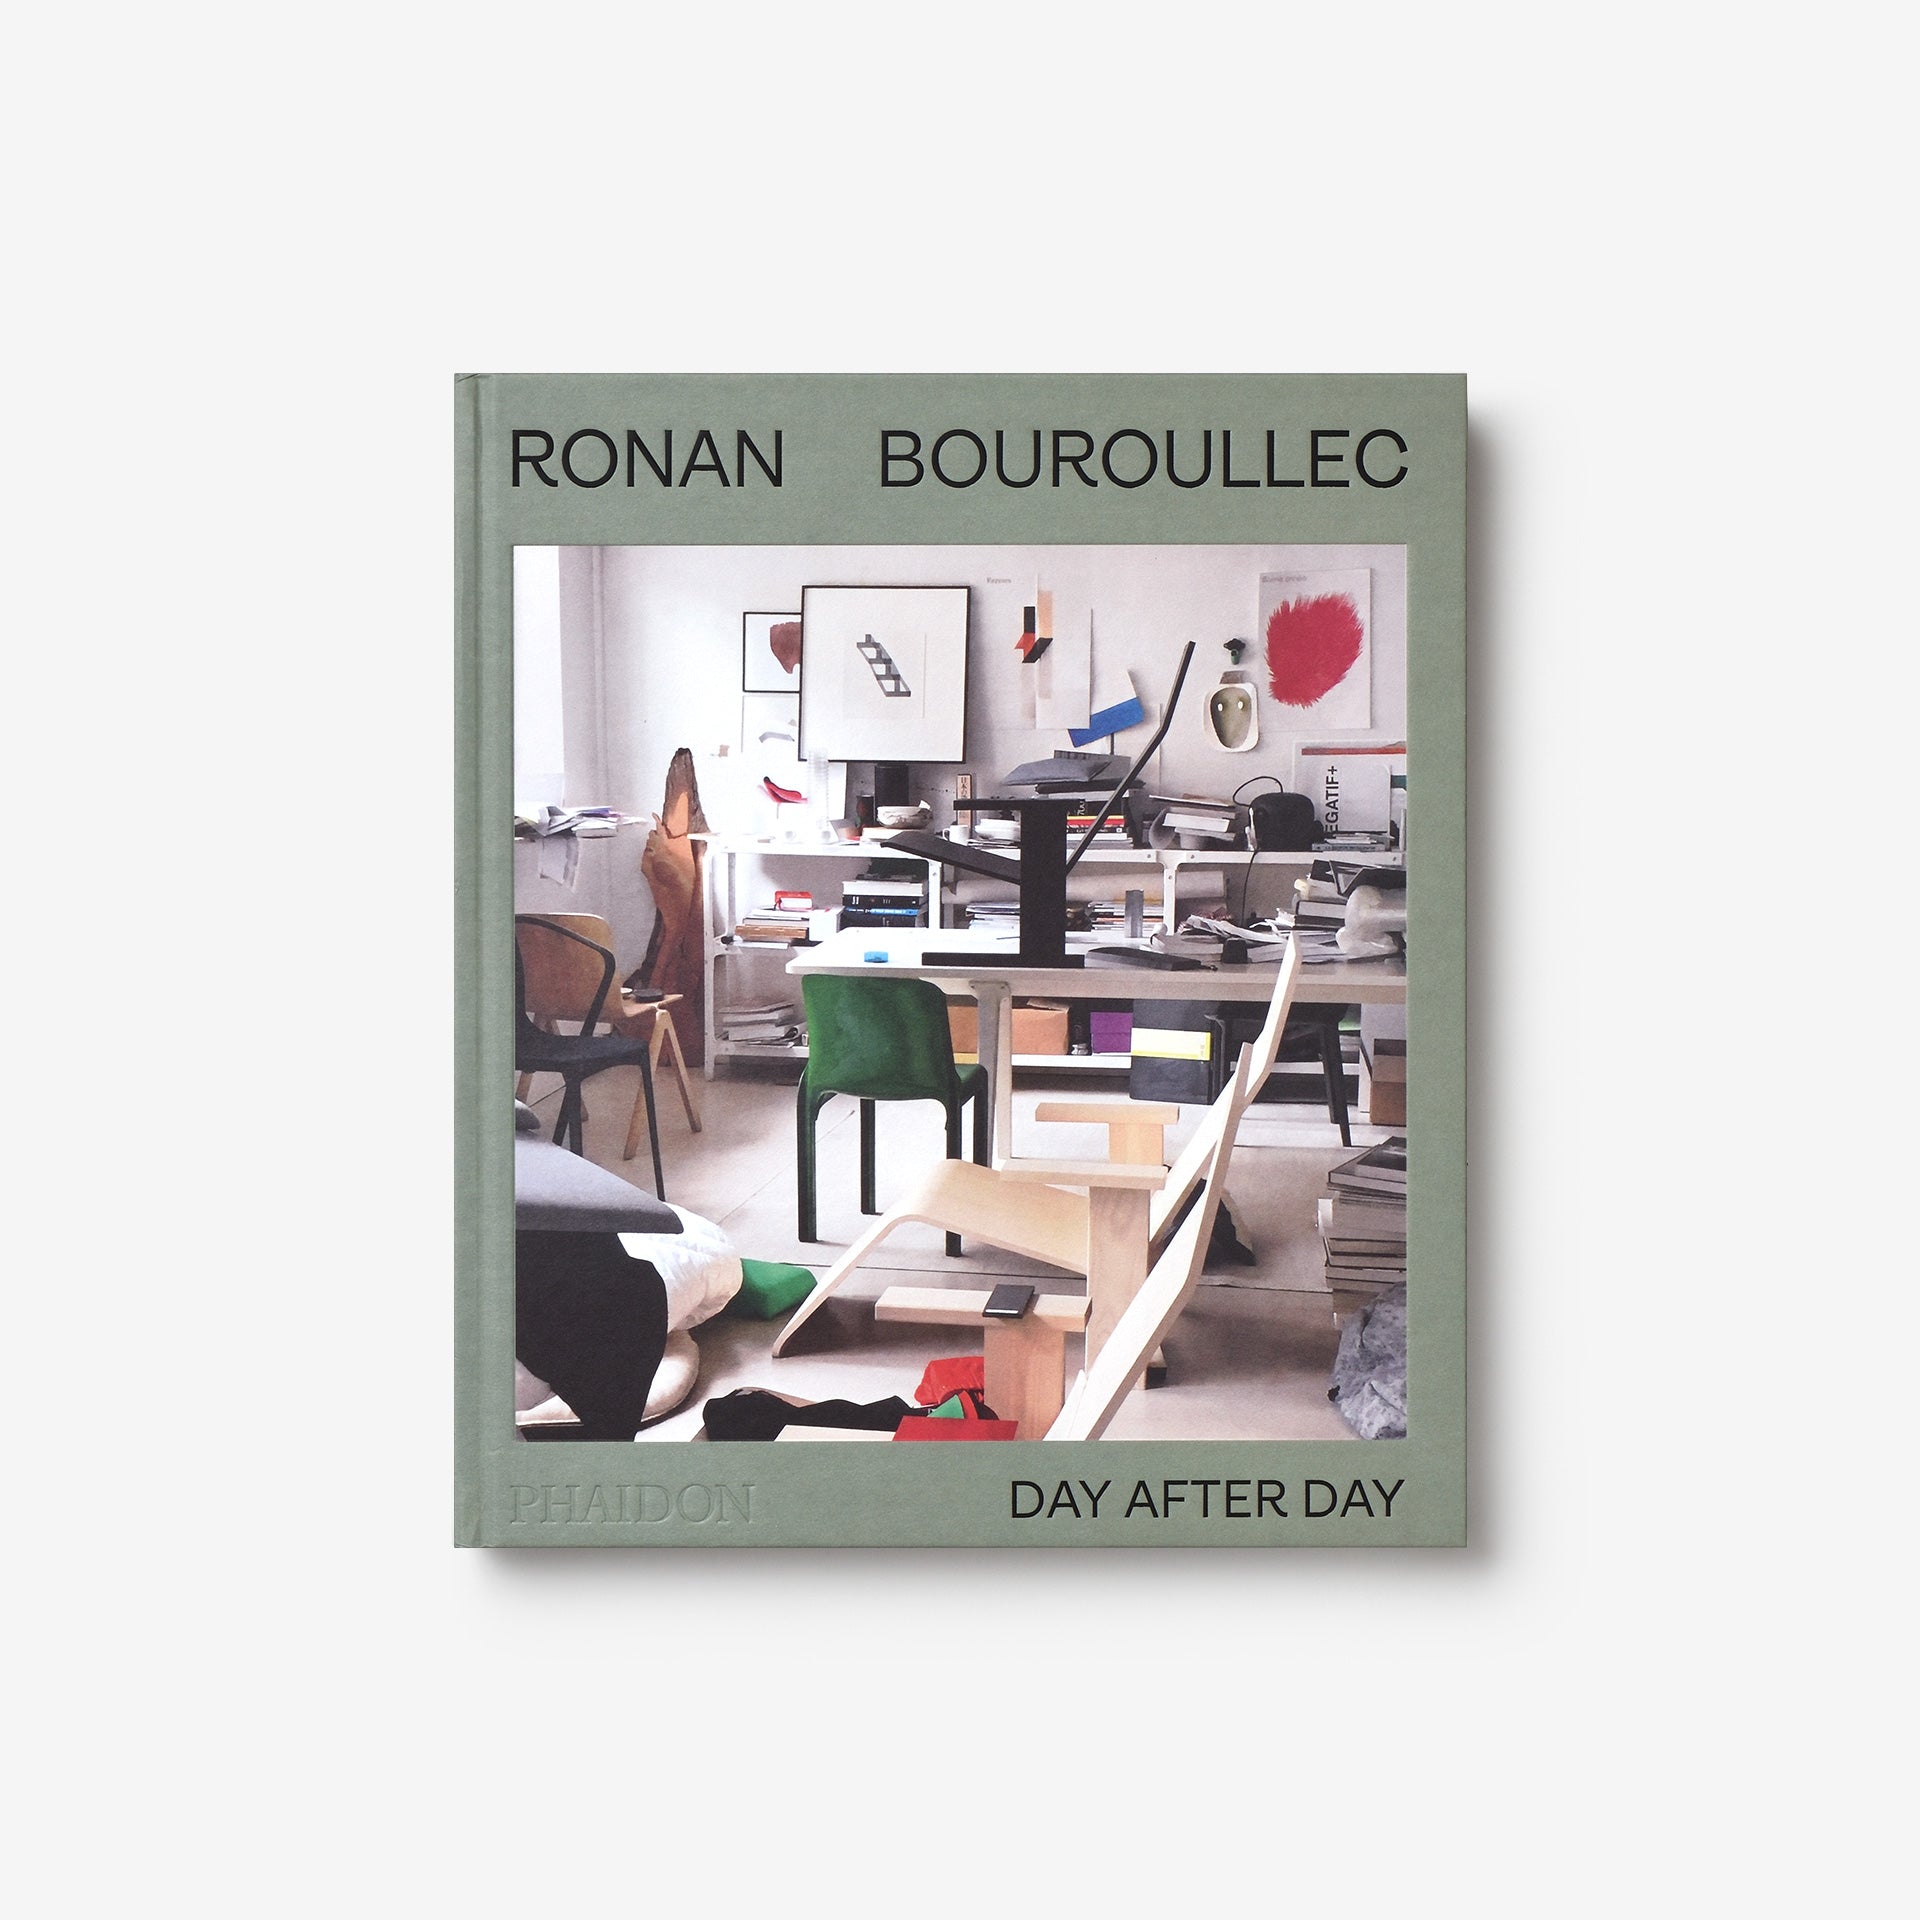 Ronan Bouroullec: Day After Day | North East